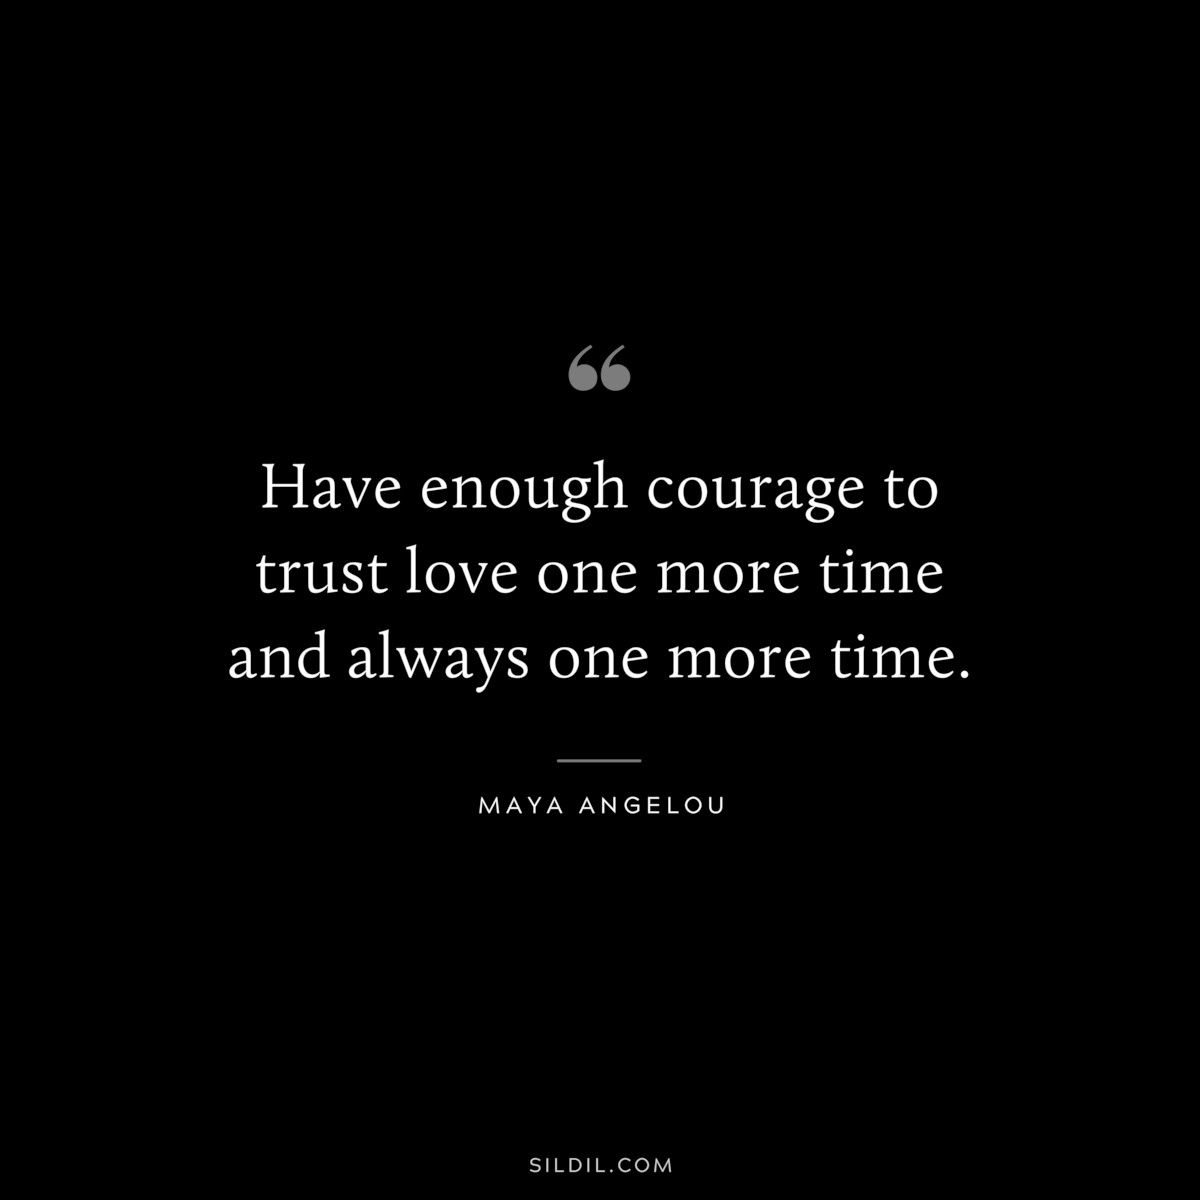 Have enough courage to trust love one more time and always one more time. ― Maya Angelou